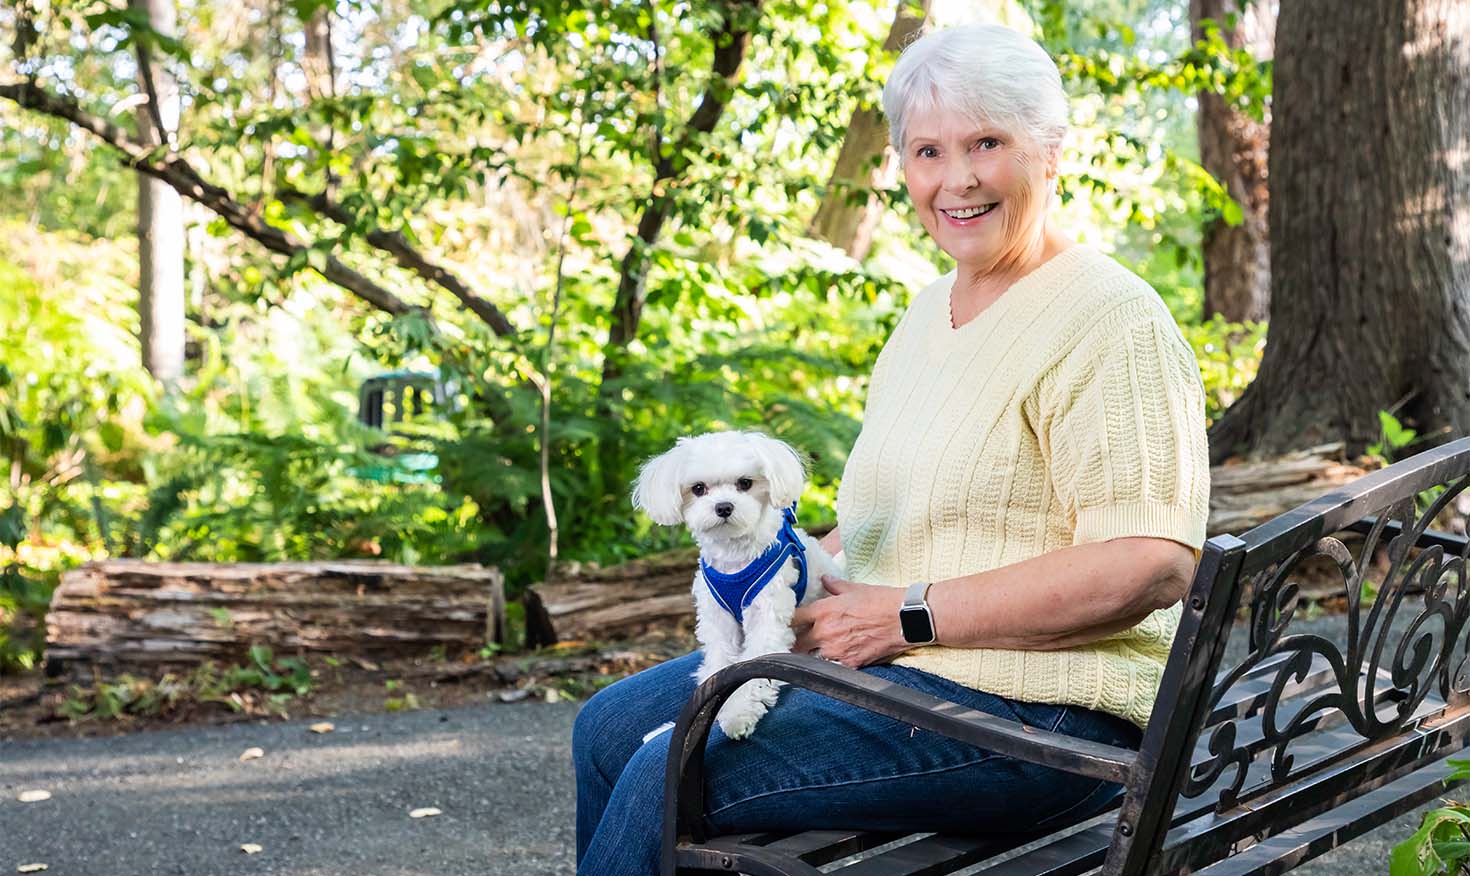 Senior woman sitting on an outdoor bench holding a small white dog in a blue harness